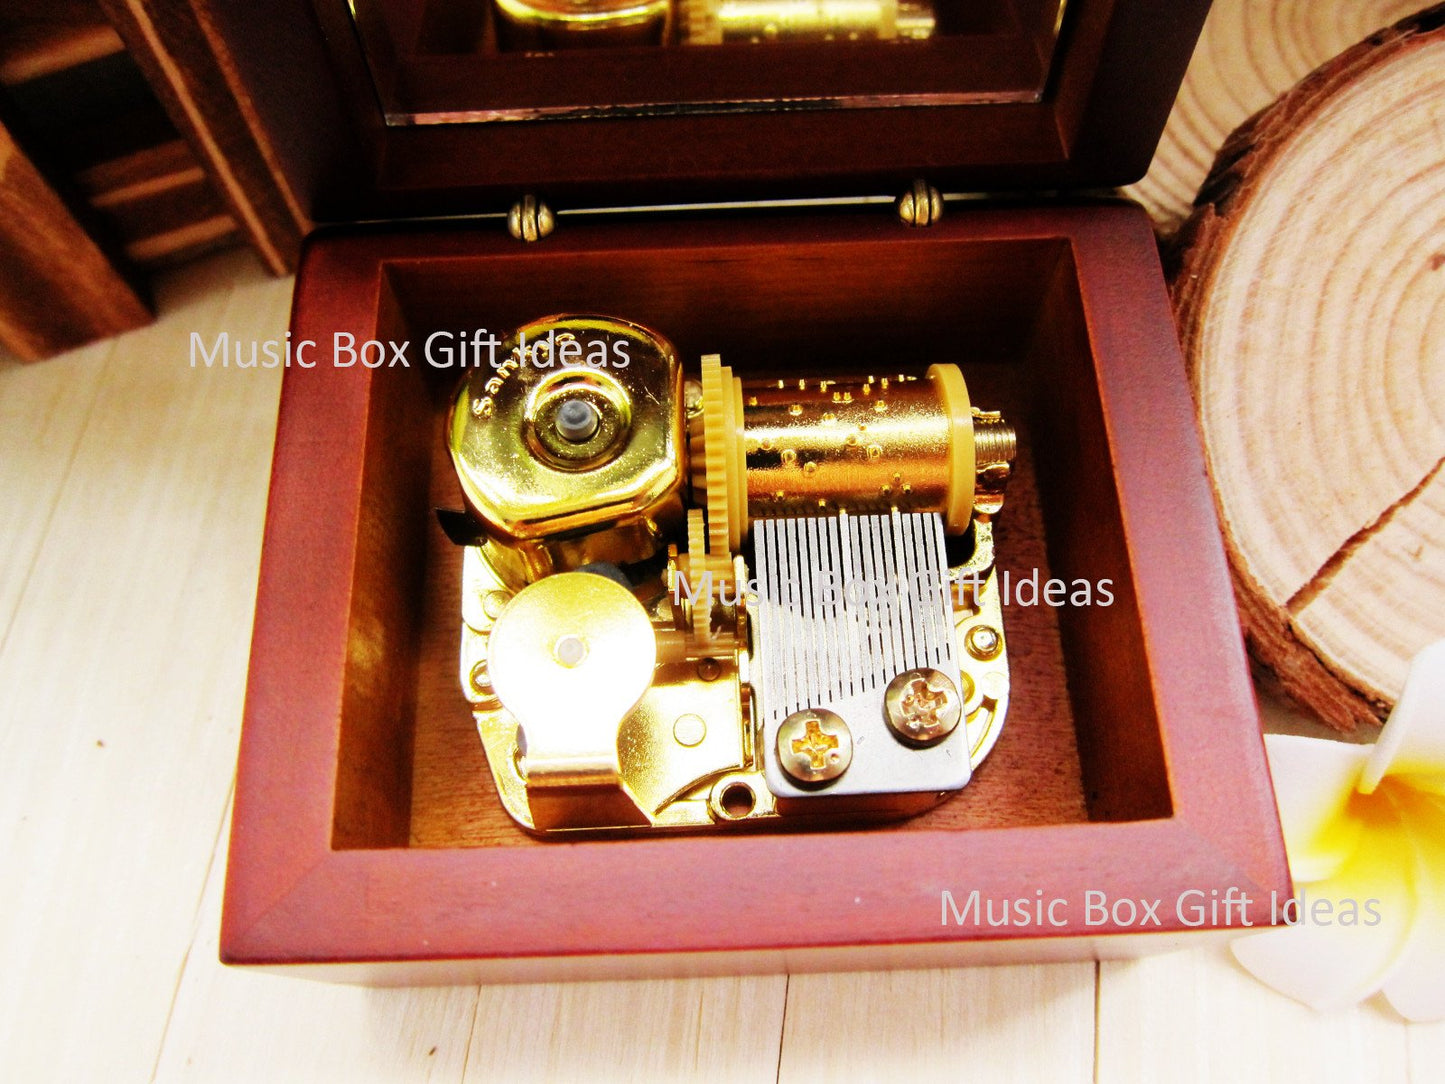 Musical The Phantom of the Opera Think of Me 18-Note Music Box Gift (Wooden Clockwork) - Music Box Gift Ideas